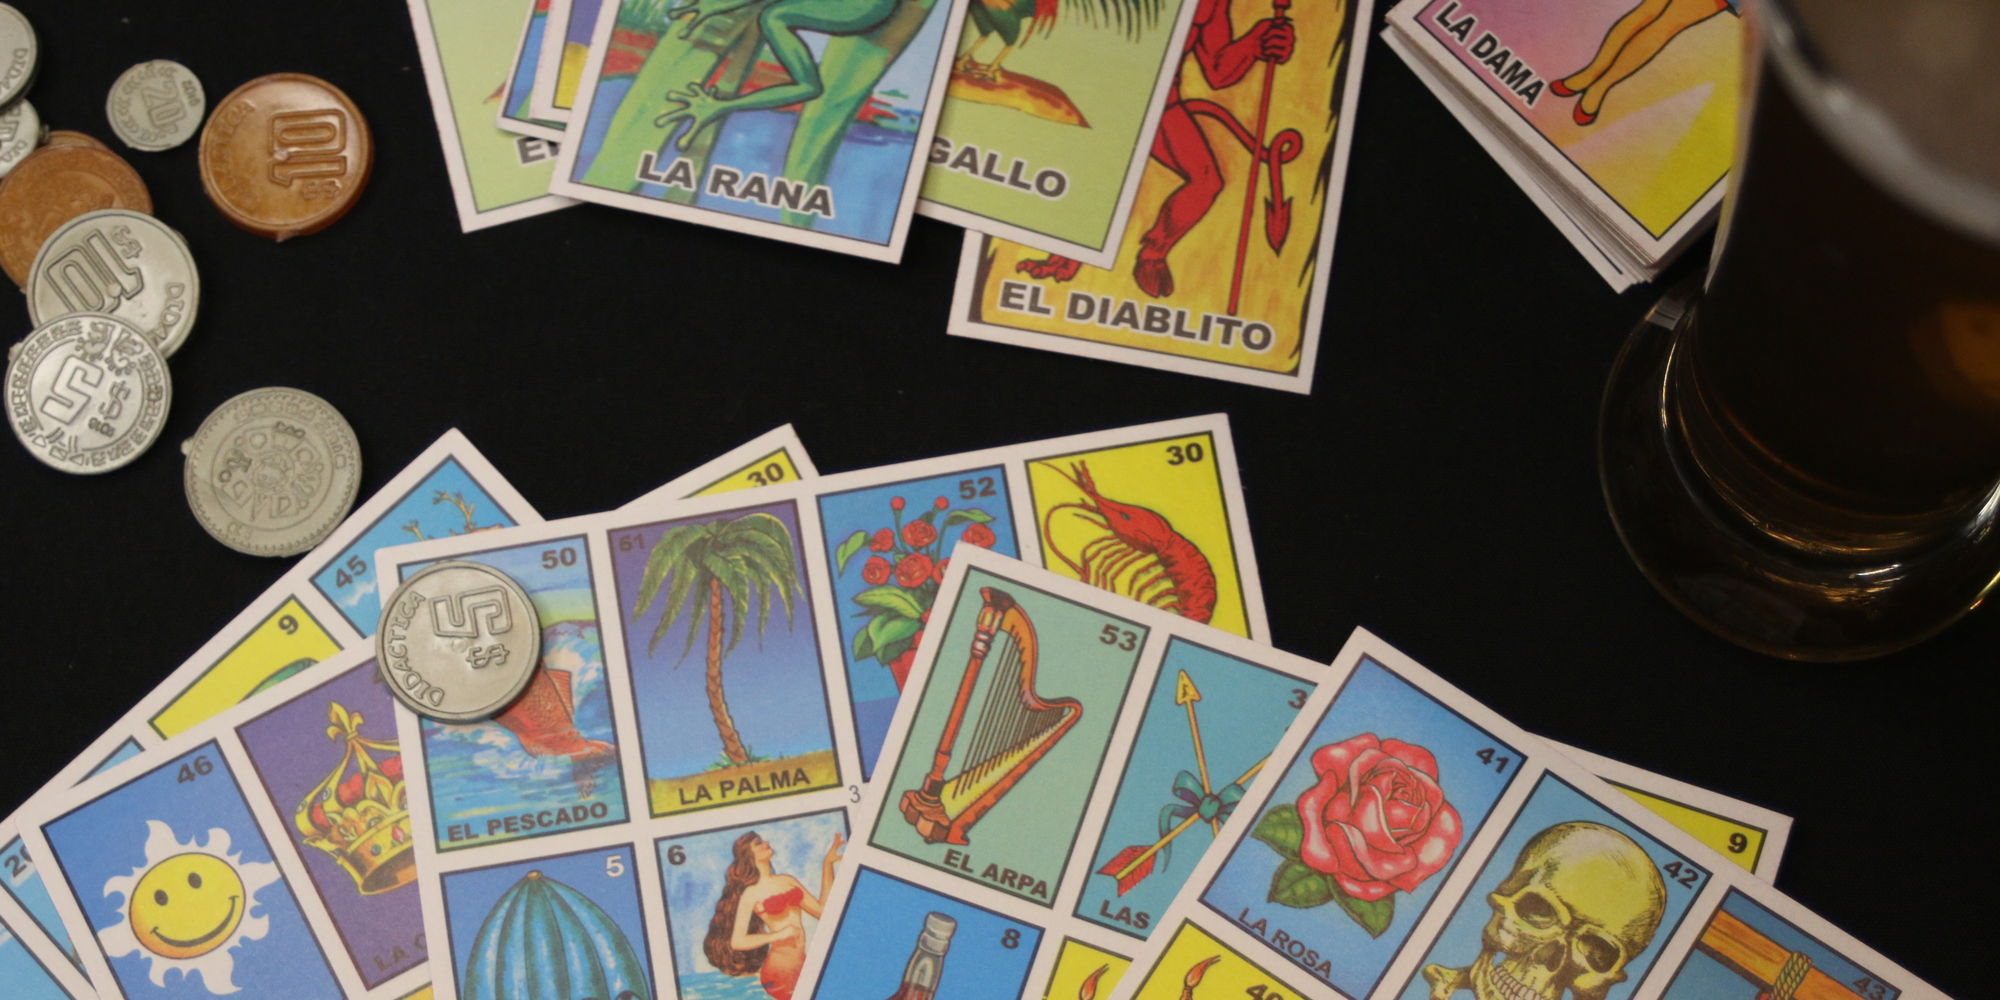 Loteria  promotional image